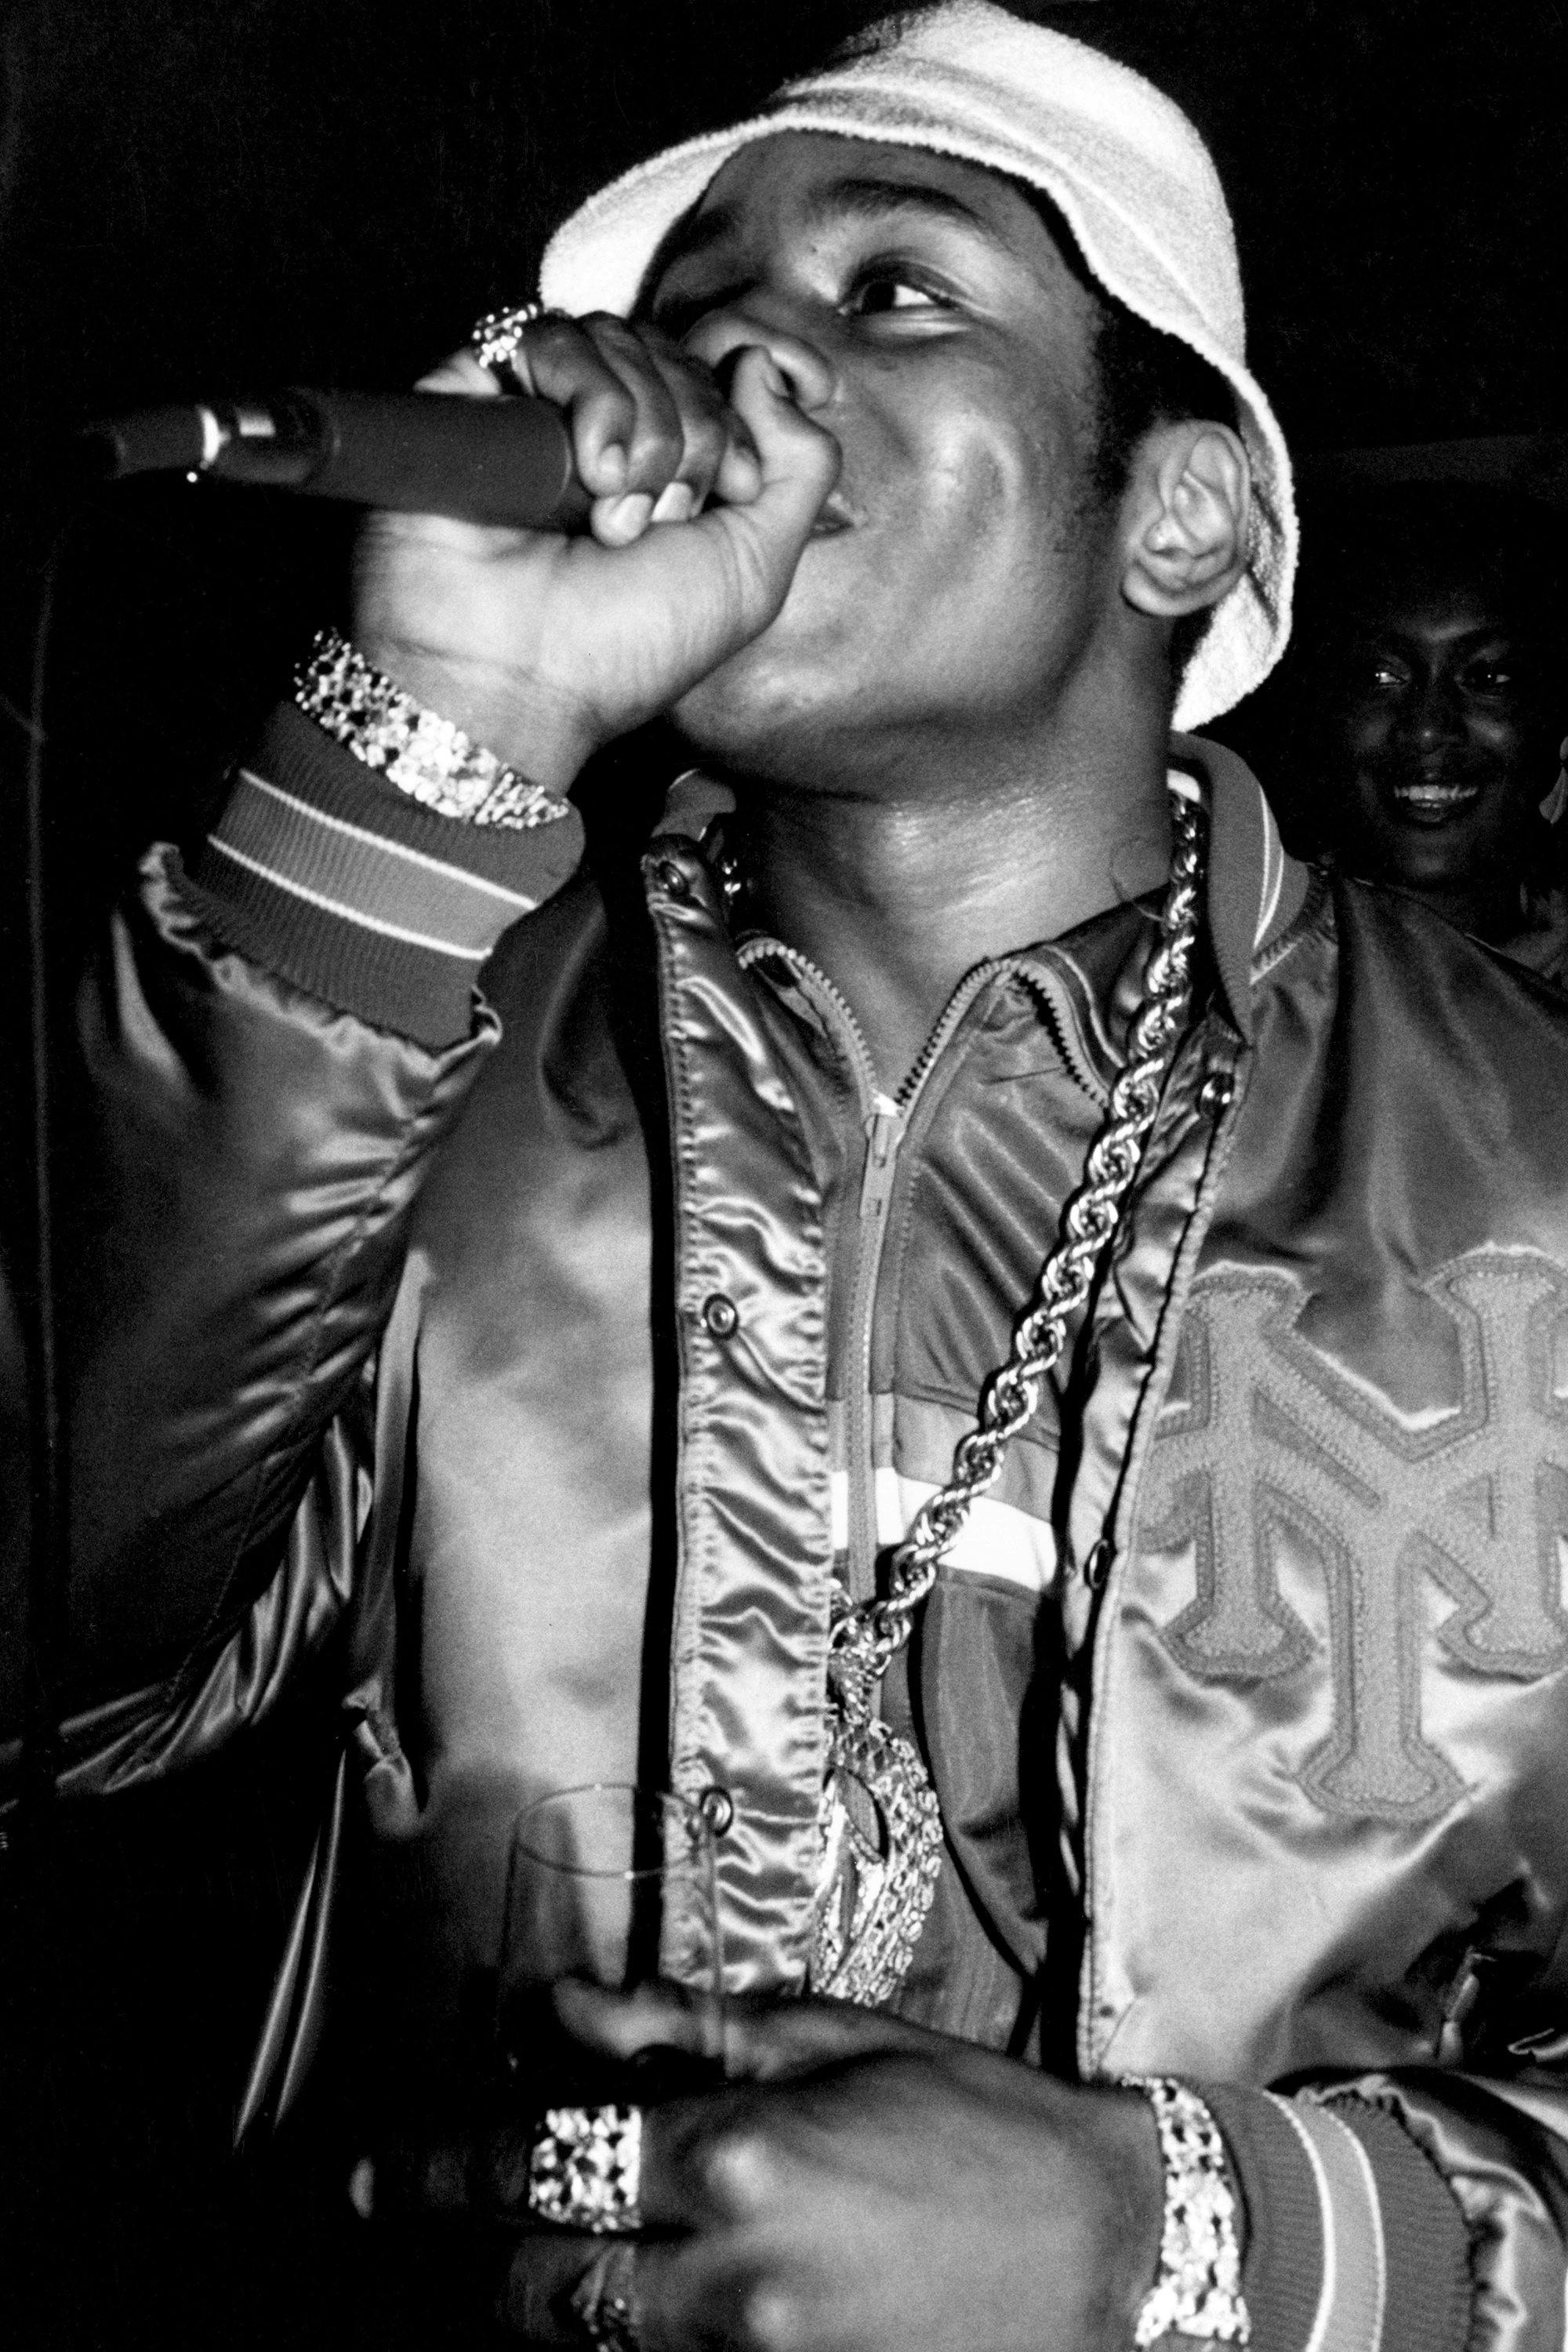 LL Cool J on stage 1987